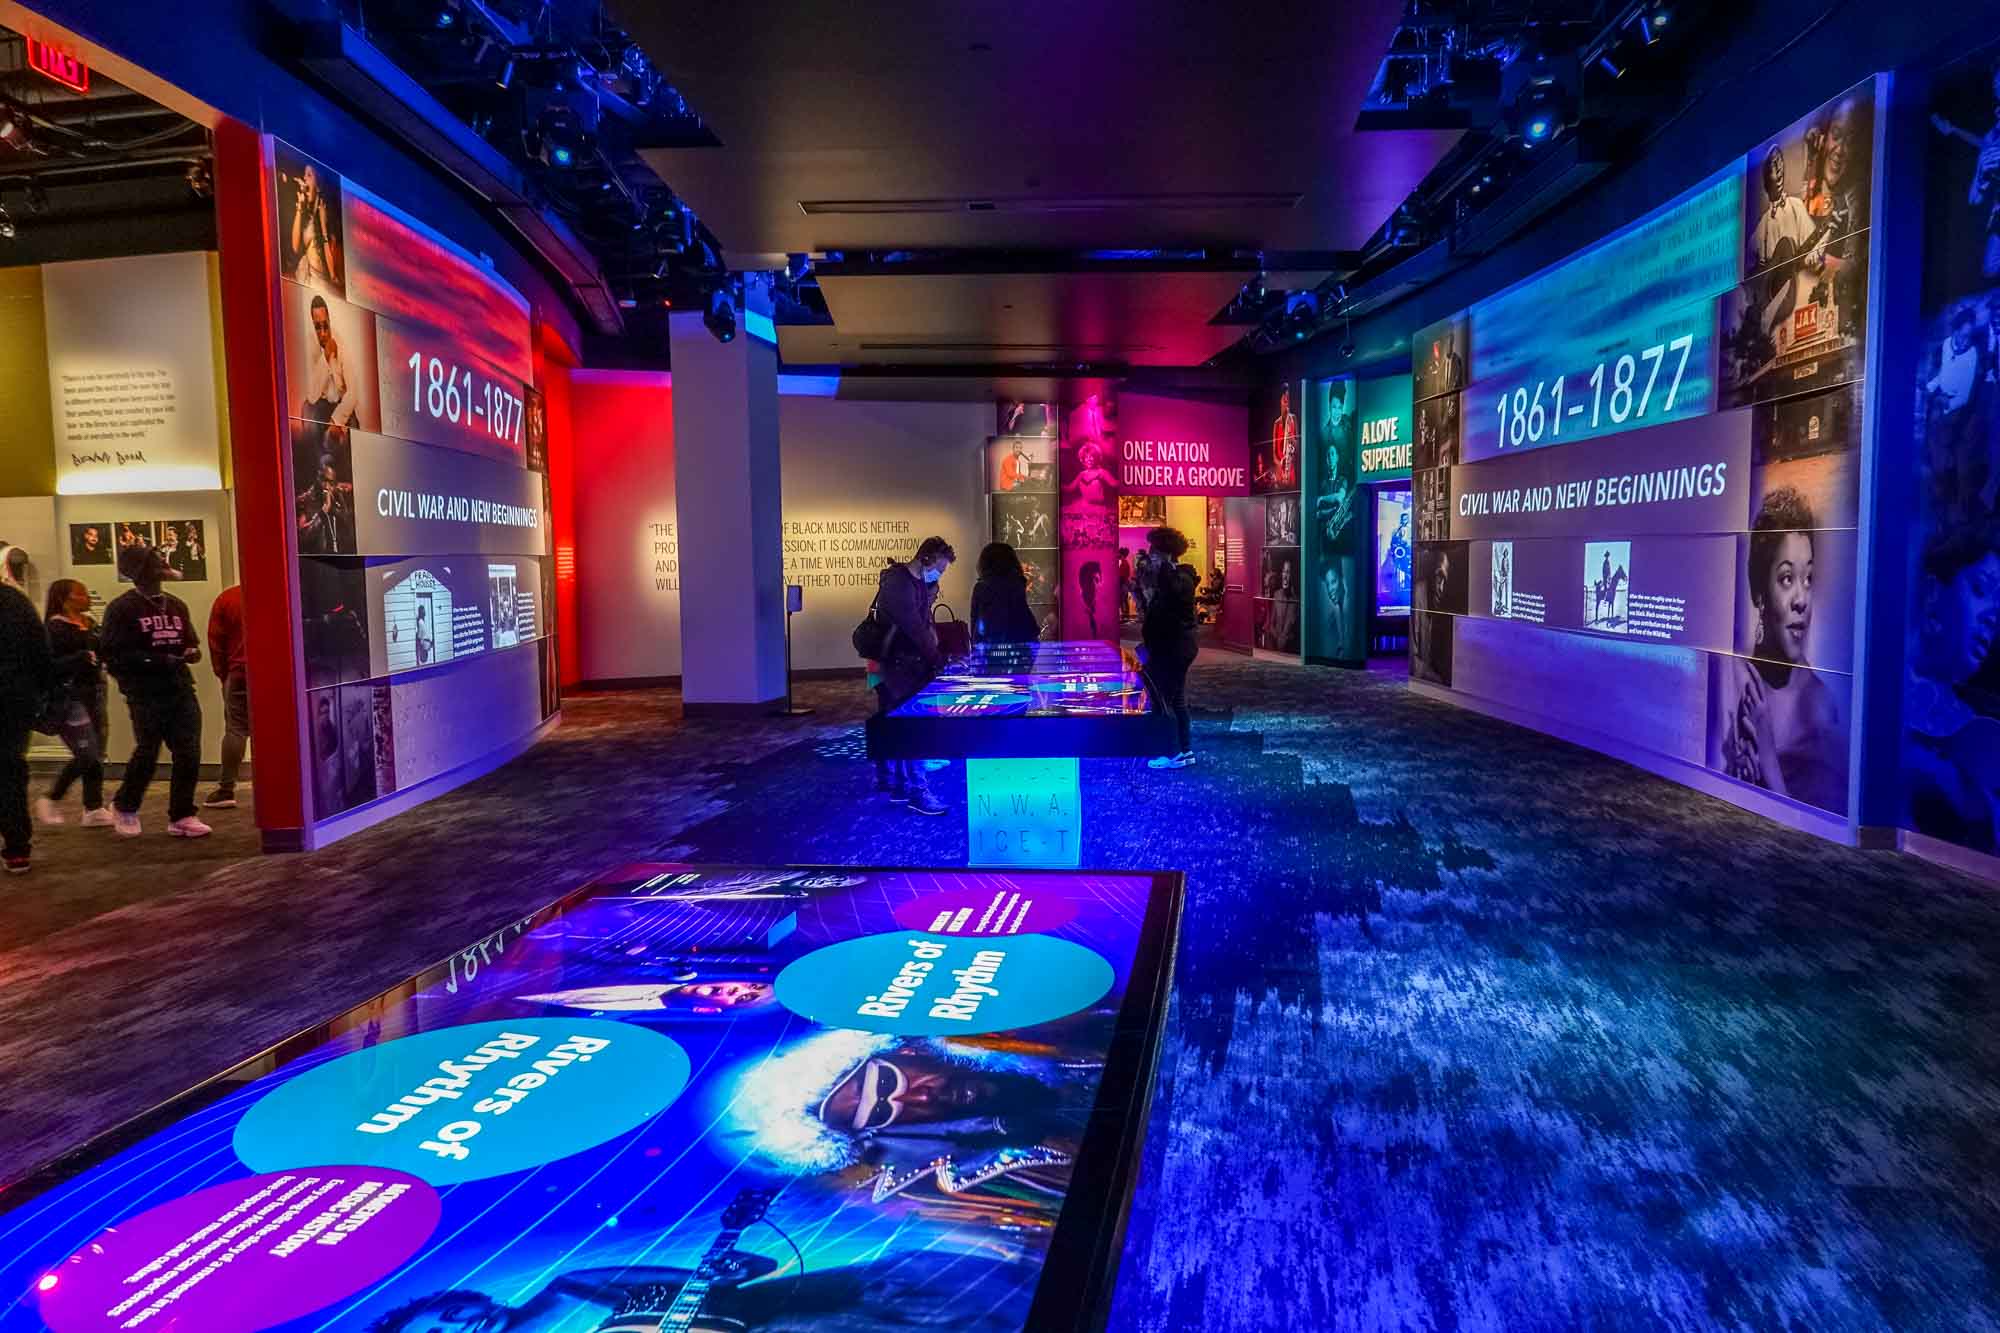 People standing at illuminated tables in a dark room filled with colorful, lit up exhibits